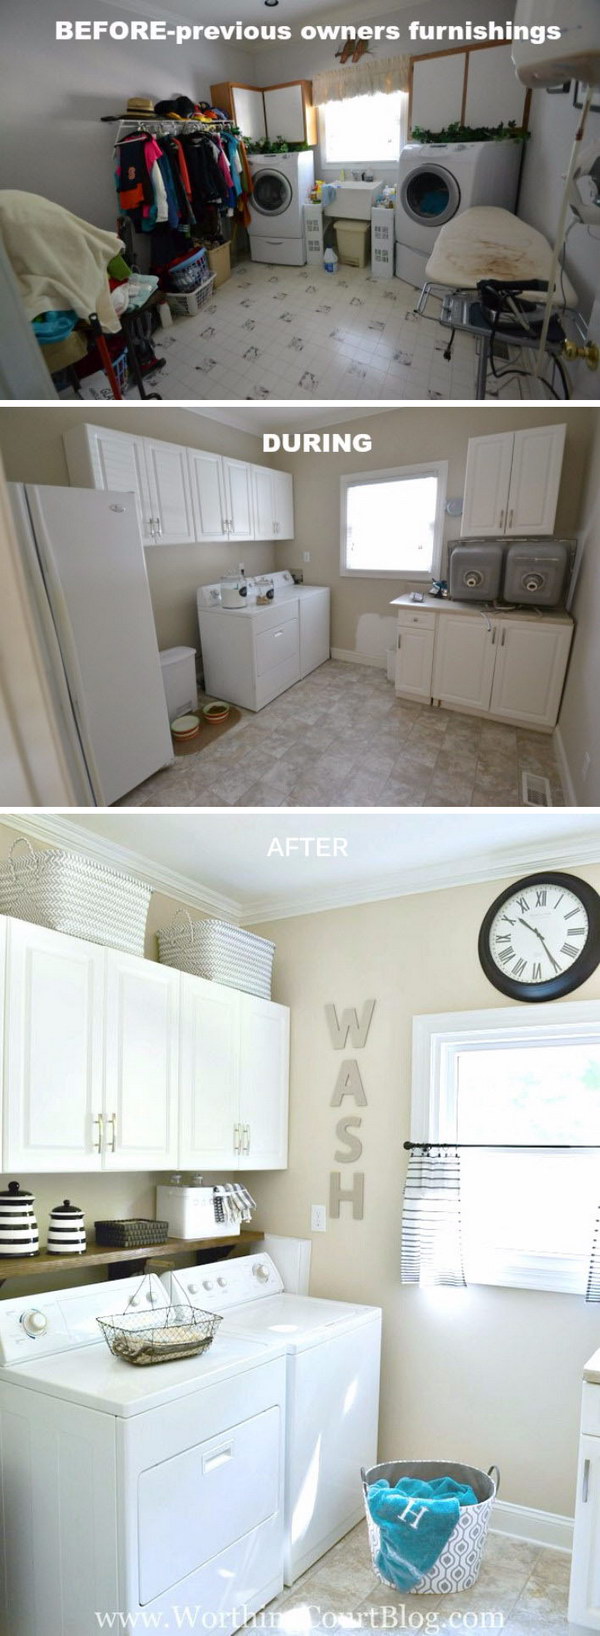 Laundry Room Reveal with farmhouse and Rustic Touches: From Messy to Orderly and Organized. 